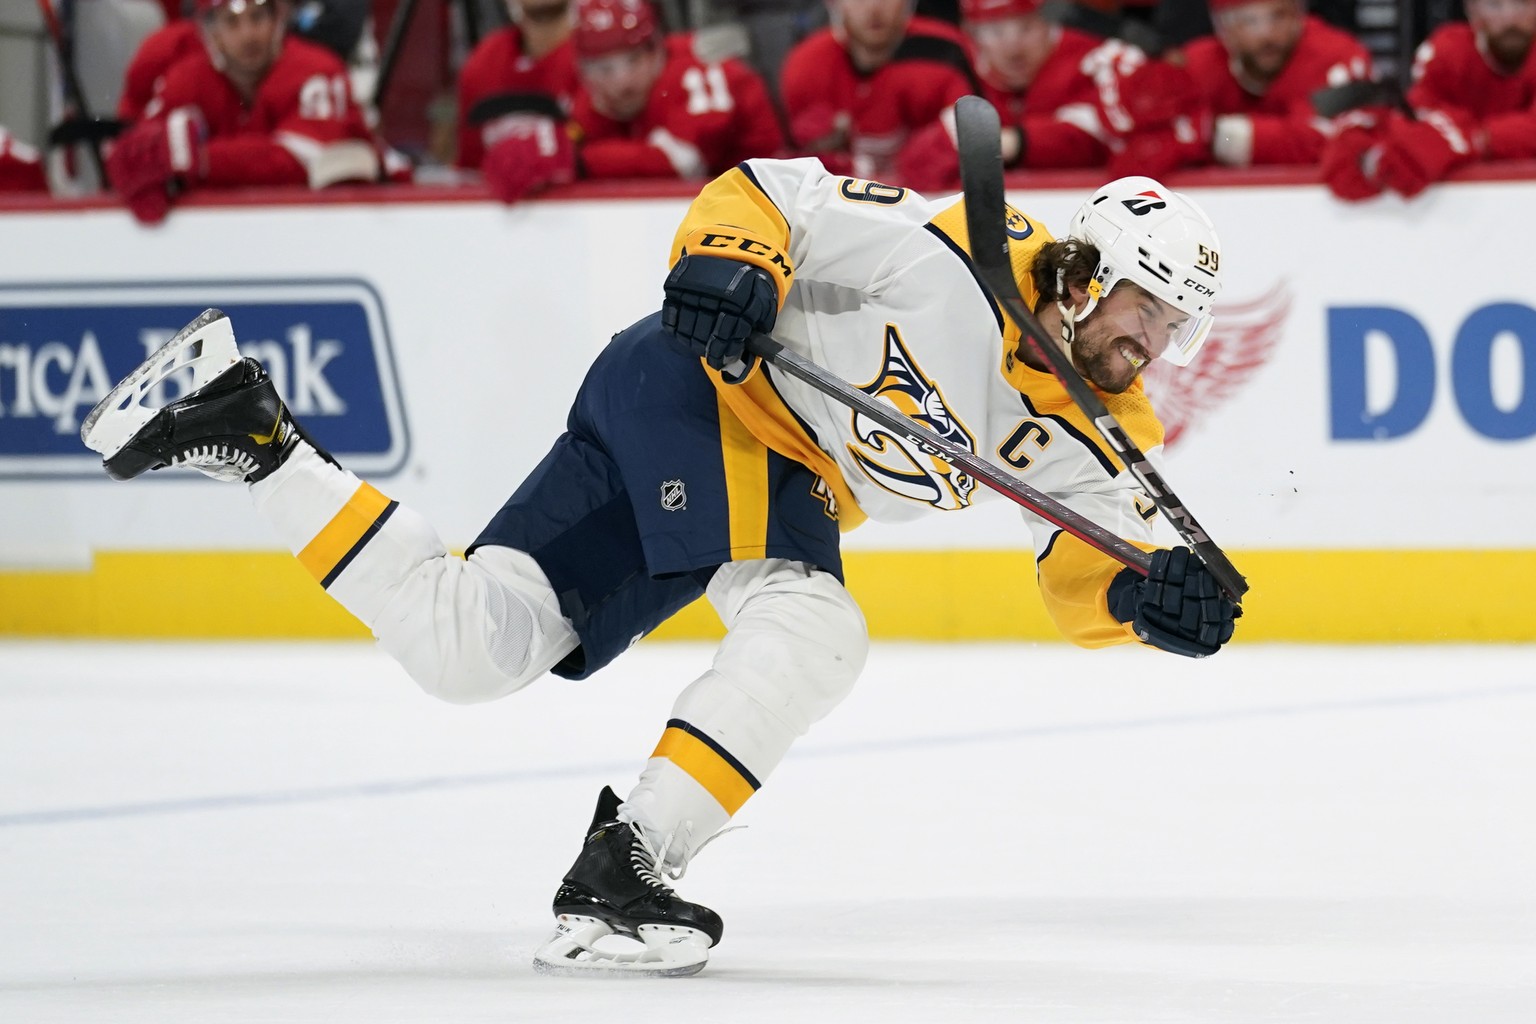 Nashville Predators defenseman Roman Josi breaks his stick on a shot against the Detroit Red Wings in the first period of an NHL hockey game Tuesday, Feb. 23, 2021, in Detroit. (AP Photo/Paul Sancya)